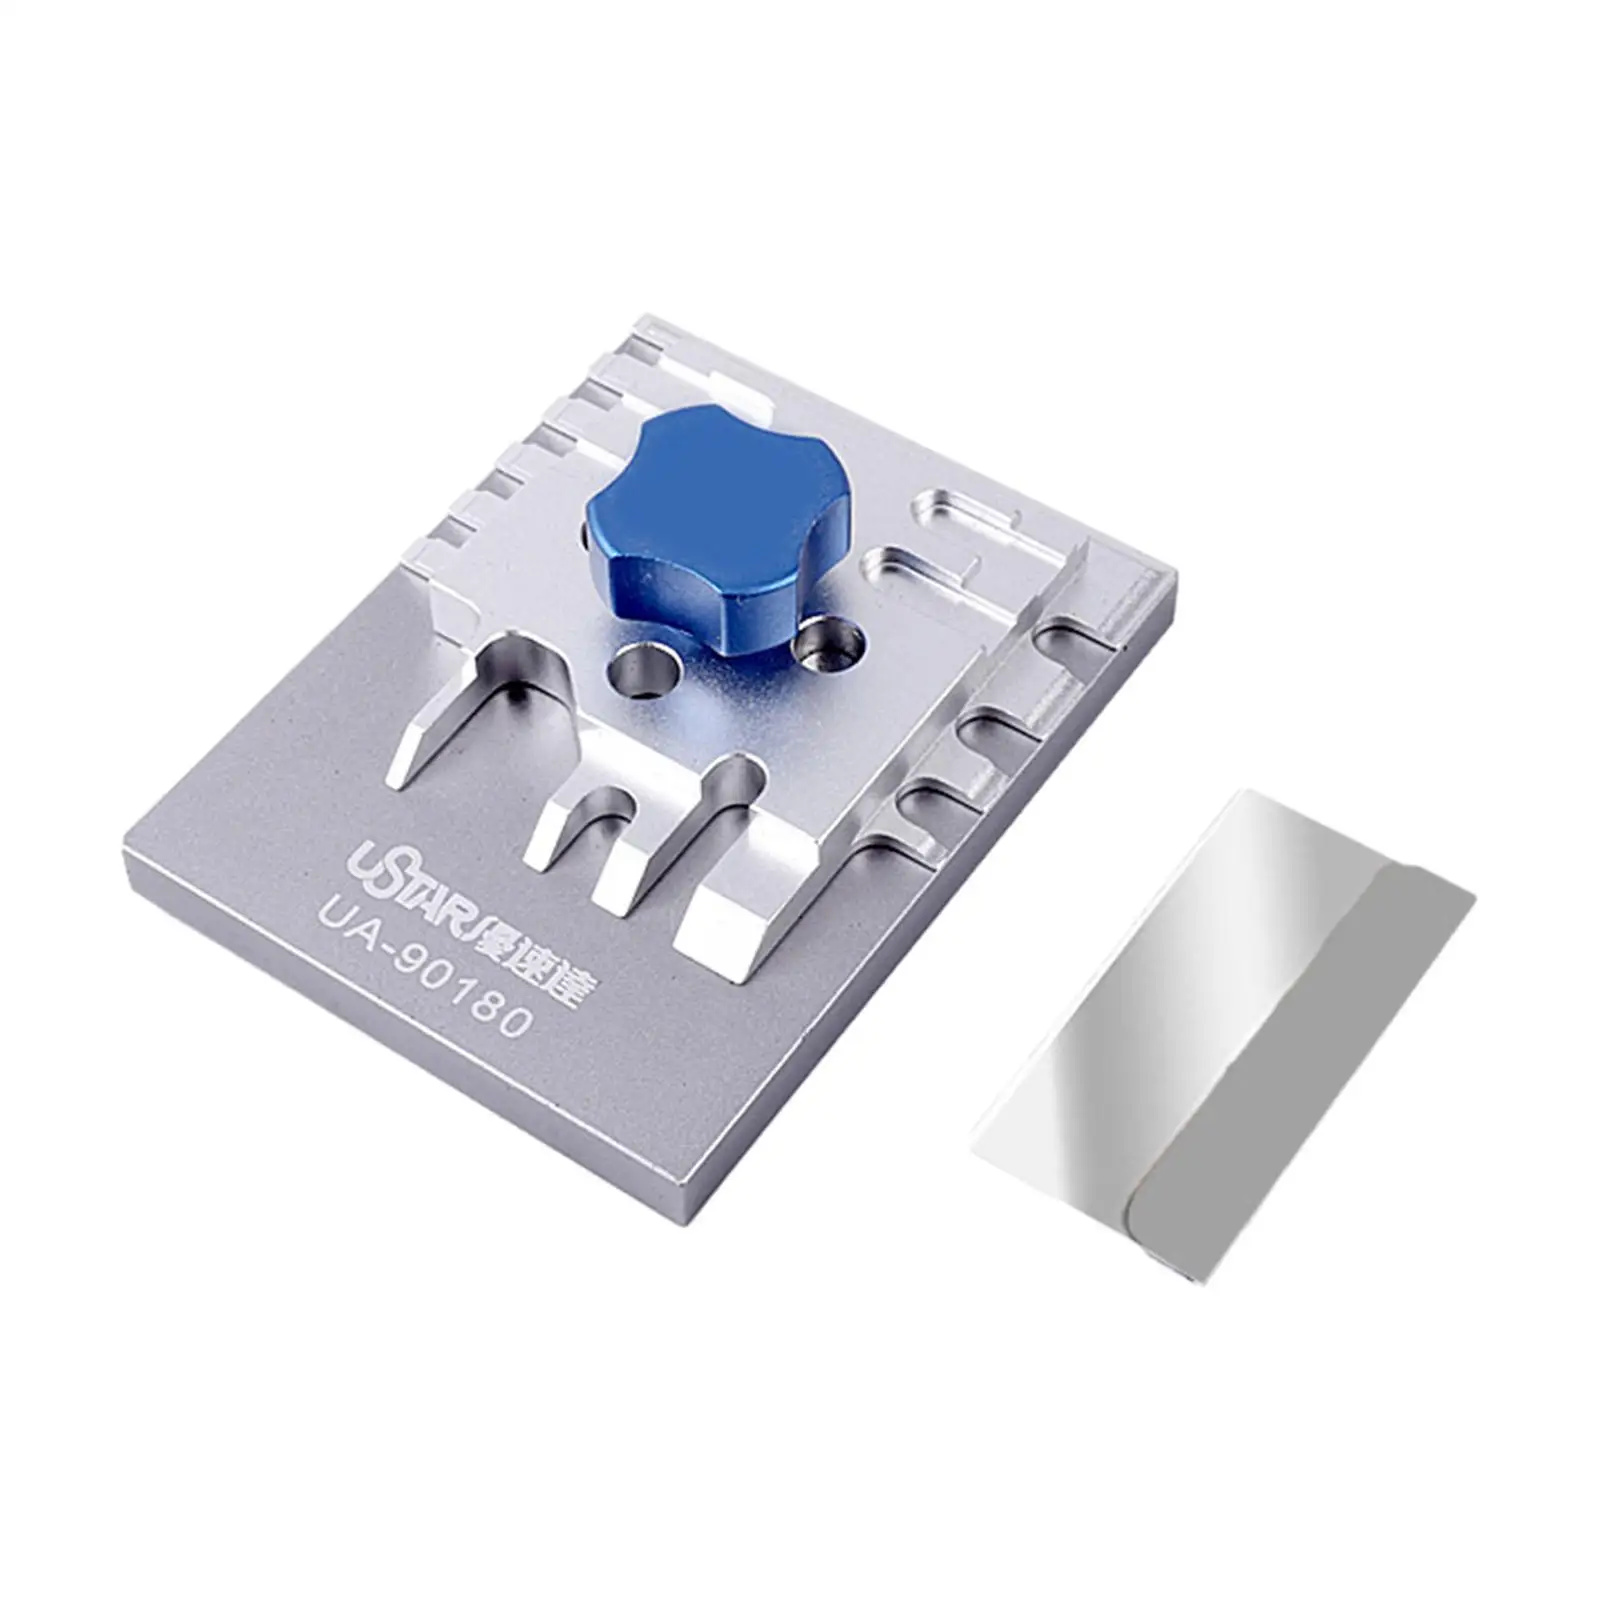 Small Etched Parts Bender Precision Bender Repair Precision Metal with Bending Aid Multi Function Modelling Tools Folding Tool